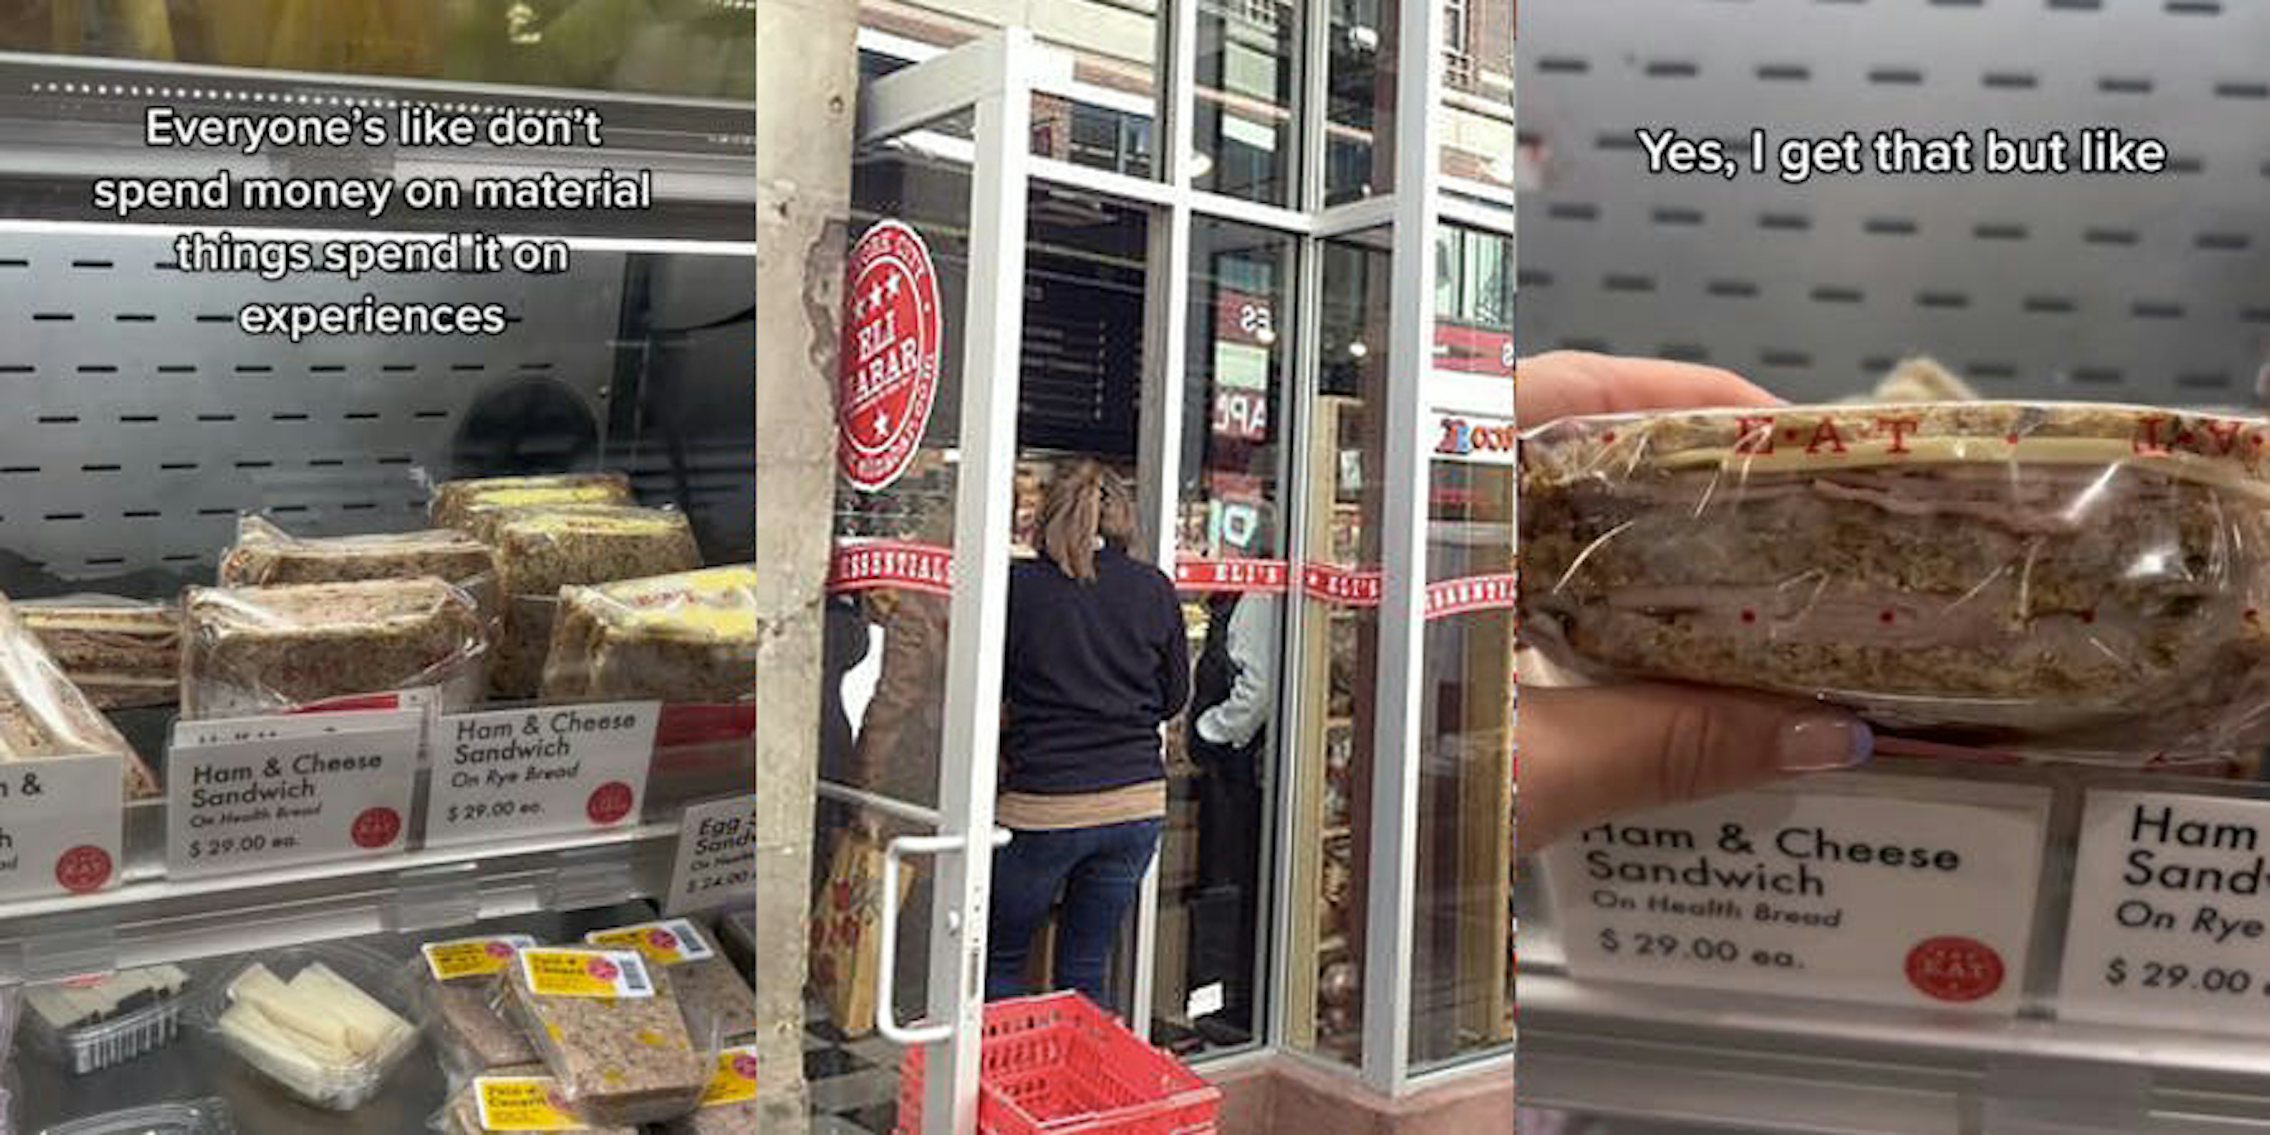 sandwiches in fridge with caption 'Everyone's like don't spend money on material things spend it on experiences' (l) Elzabar's entrance with sign above (c) sandwich in hand with caption 'Yes, I get that but like' (r)